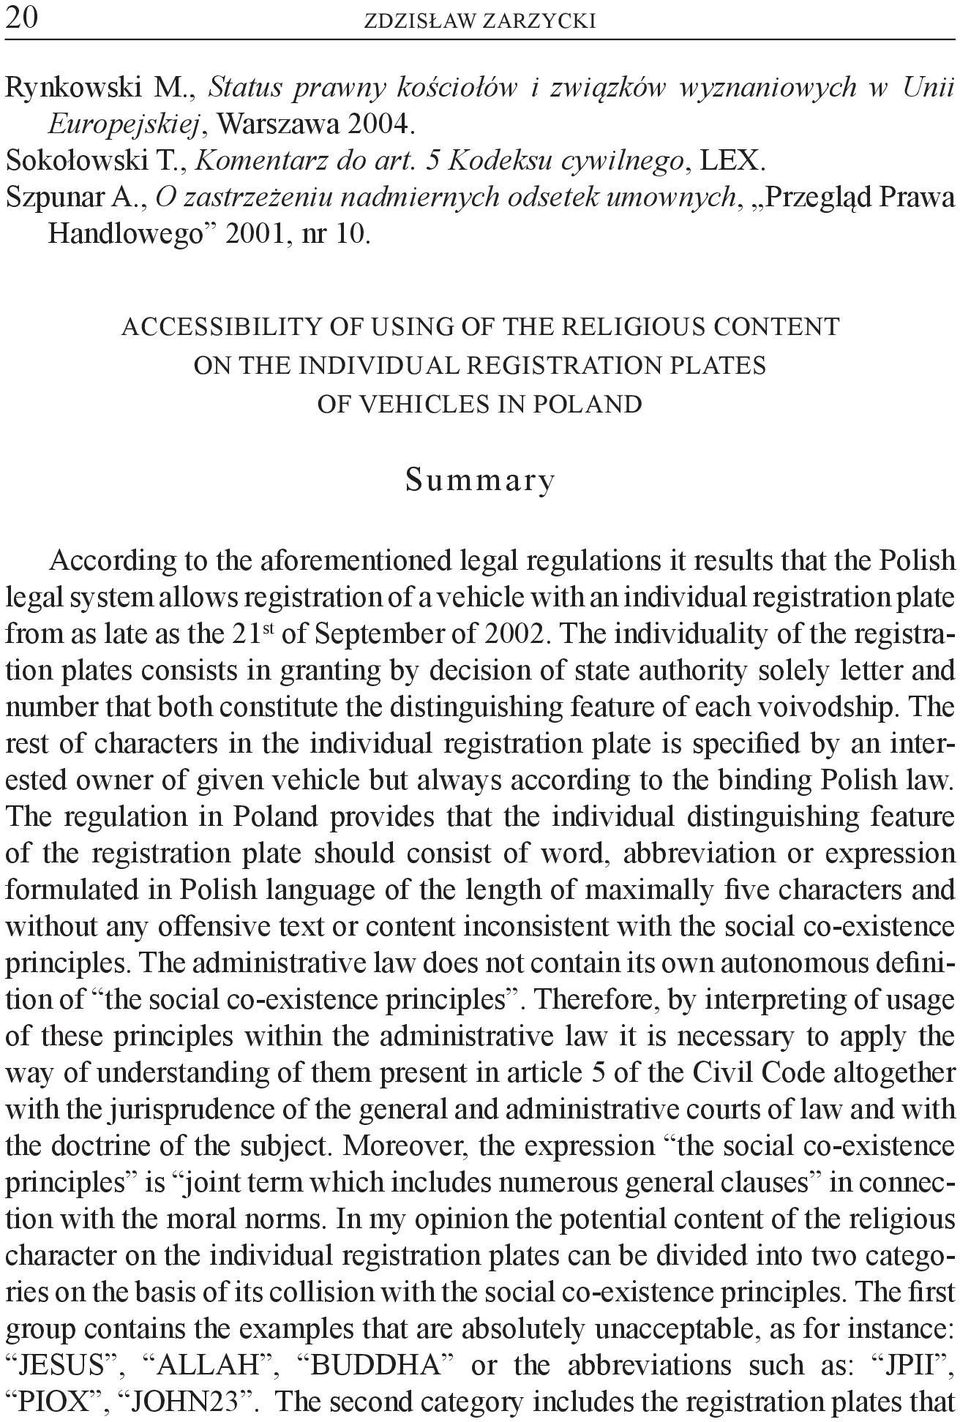 ACCESSIBILITY OF USING OF THE RELIGIOUS CONTENT ON THE INDIVIDUAL REGISTRATION PLATES OF VEHICLES IN POLAND Summary According to the aforementioned legal regulations it results that the Polish legal